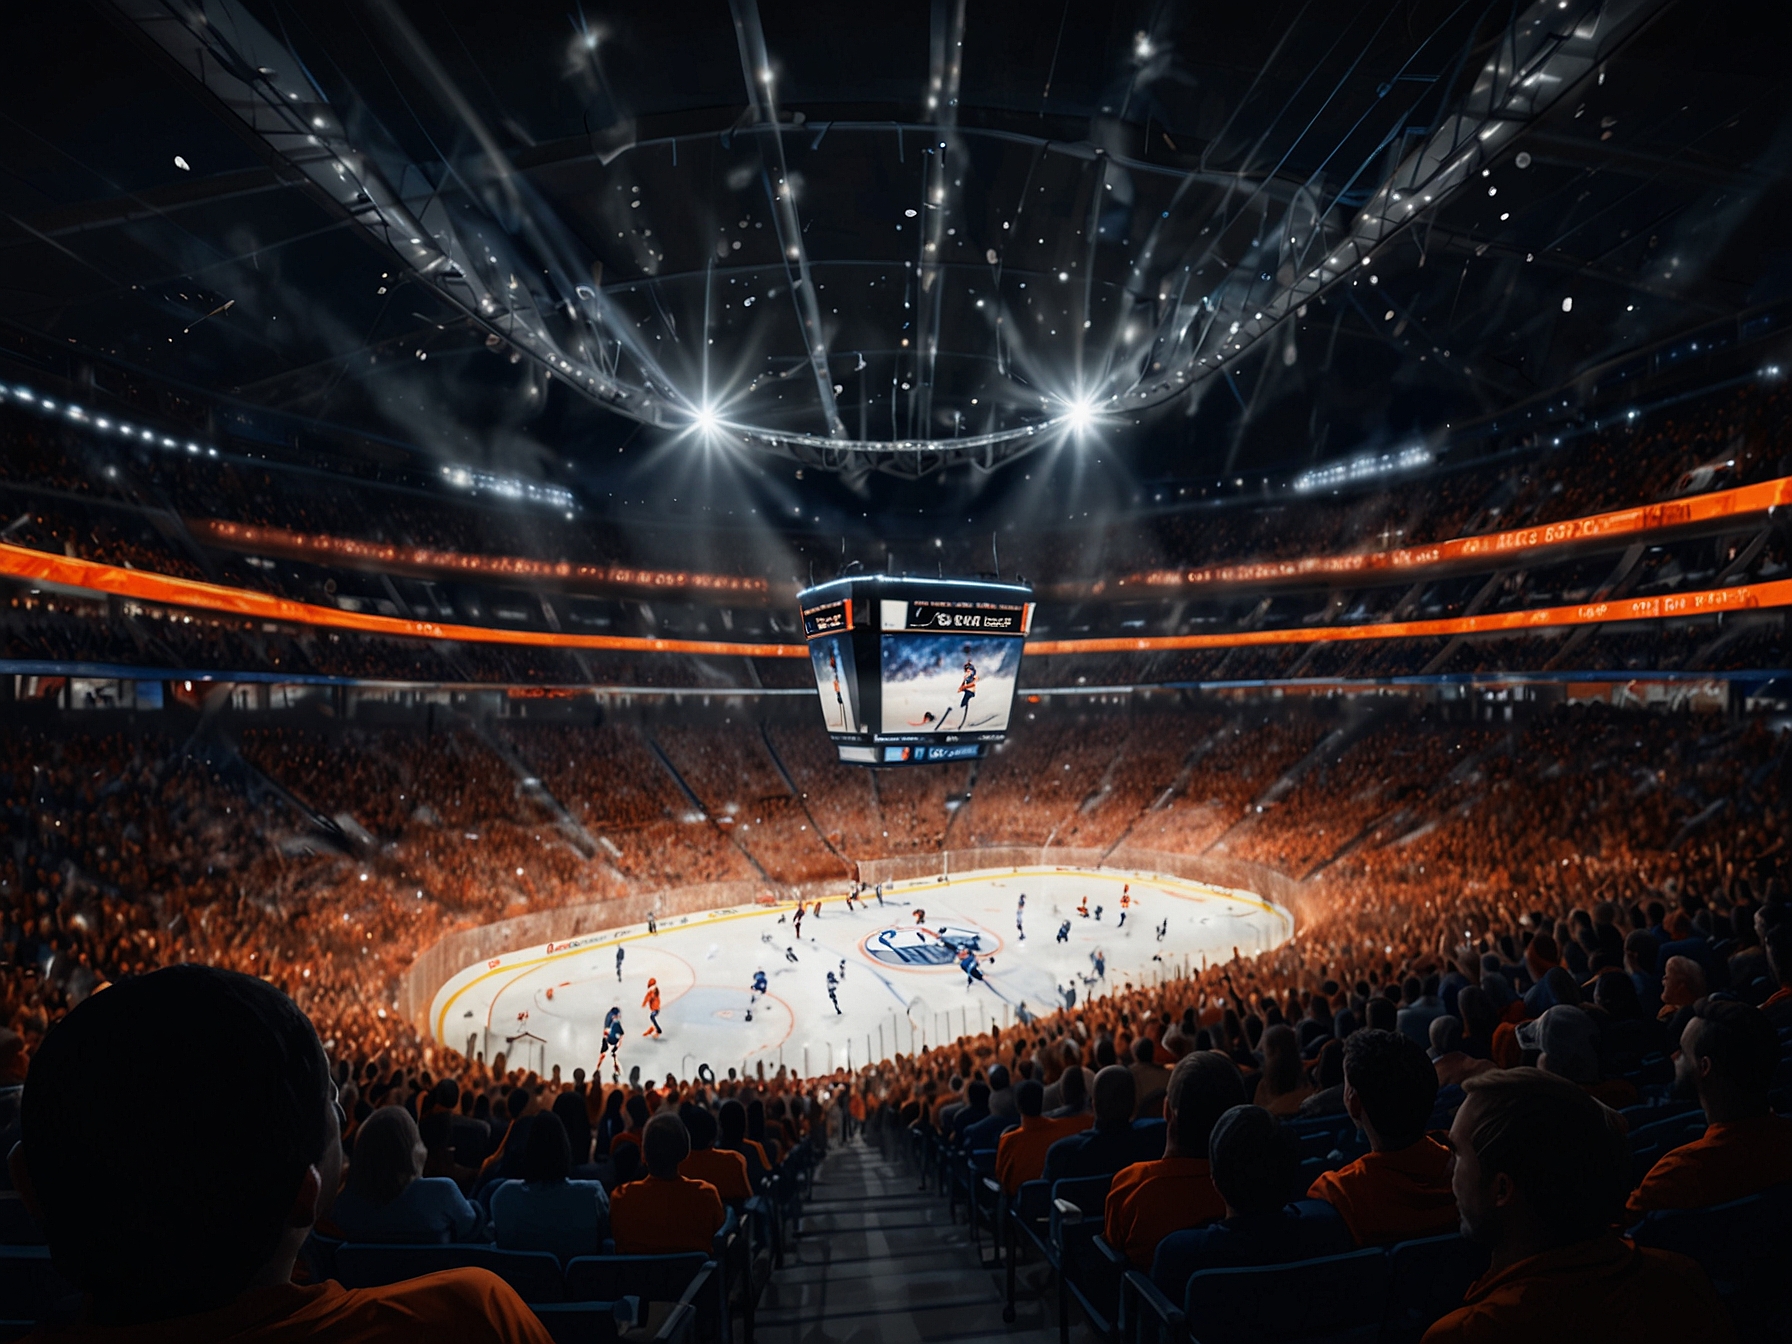 Fans in Rogers Place create an electrifying atmosphere, passionately supporting the Edmonton Oilers during a crucial Game 6, filling the arena with energy and rallying behind their team.